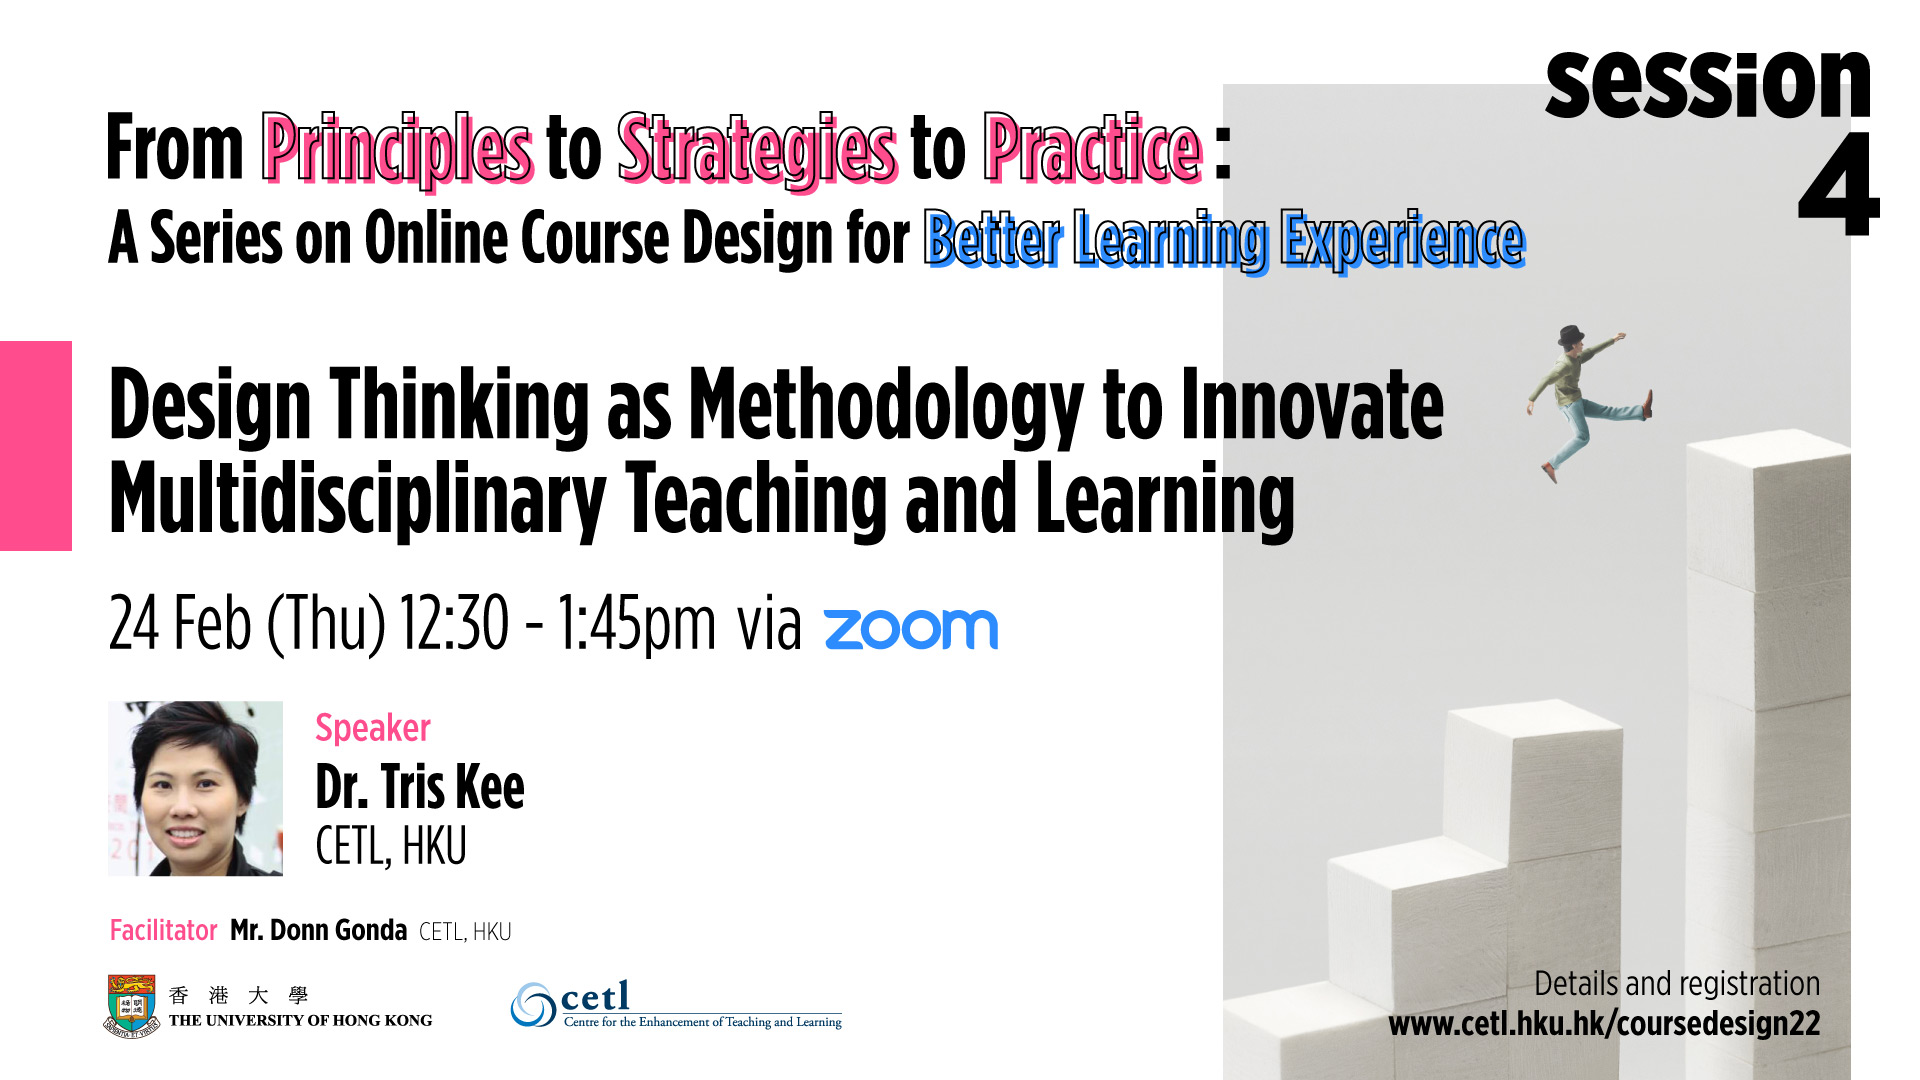 Session 4: Design Thinking as Methodology to Innovate Multidisciplinary Teaching and Learning